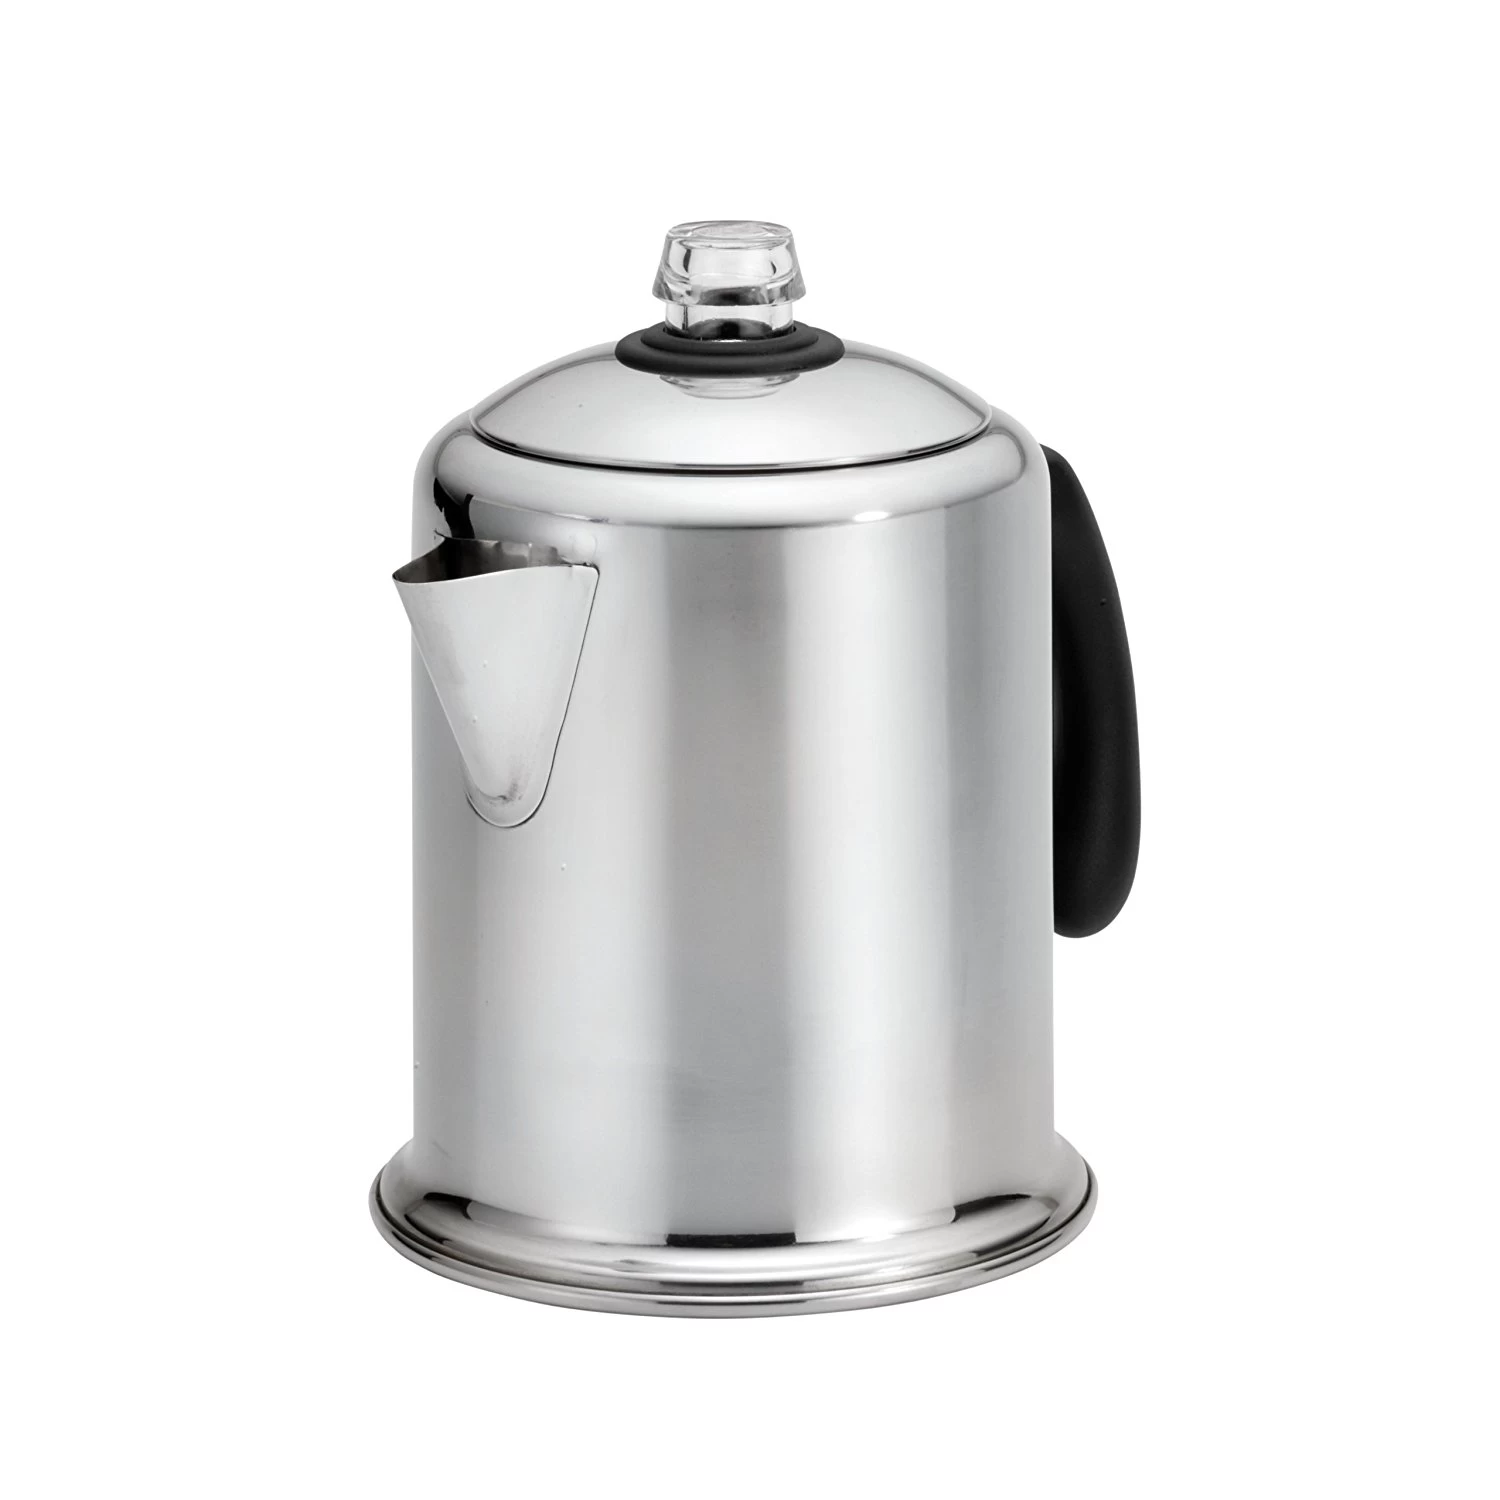 China Coffee pot company, rainbow coffee pot manufacturer china, China Stainless Steel Coffee Pot Factory